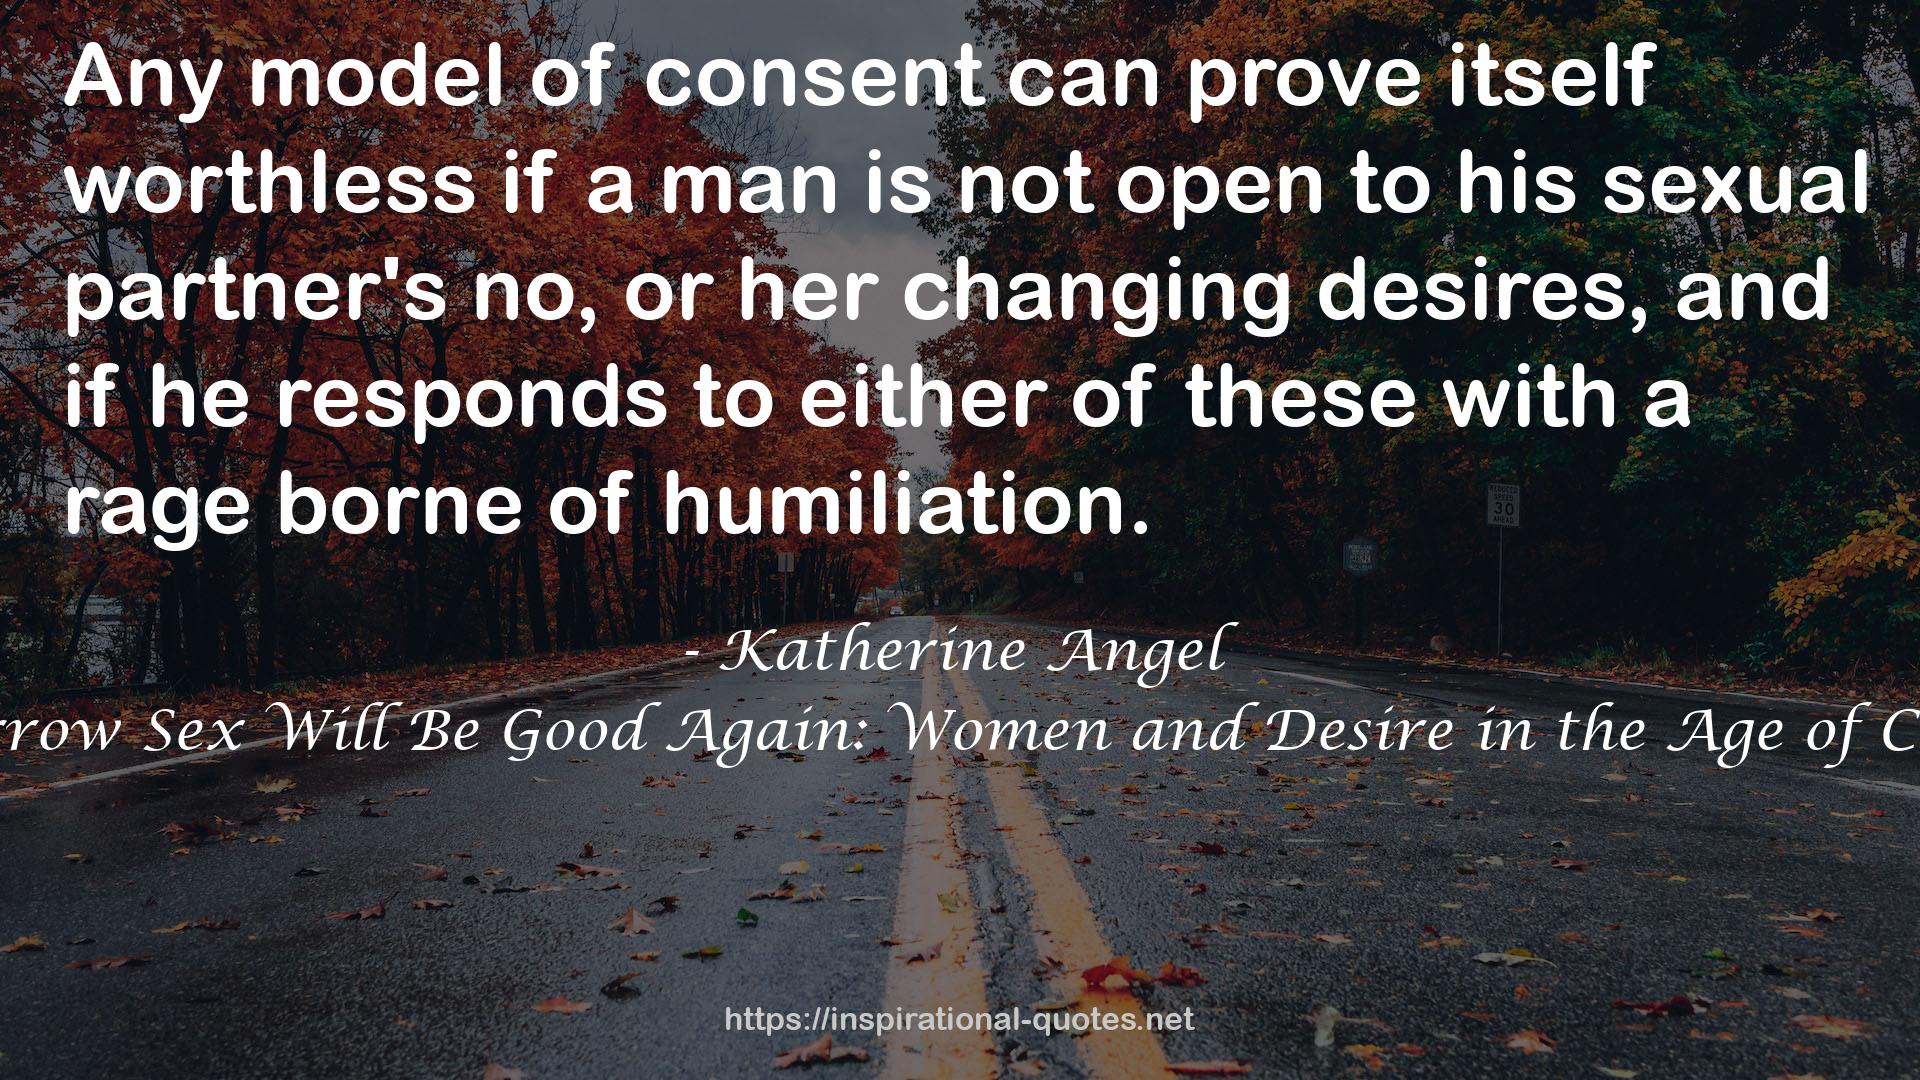 Tomorrow Sex Will Be Good Again: Women and Desire in the Age of Consent QUOTES